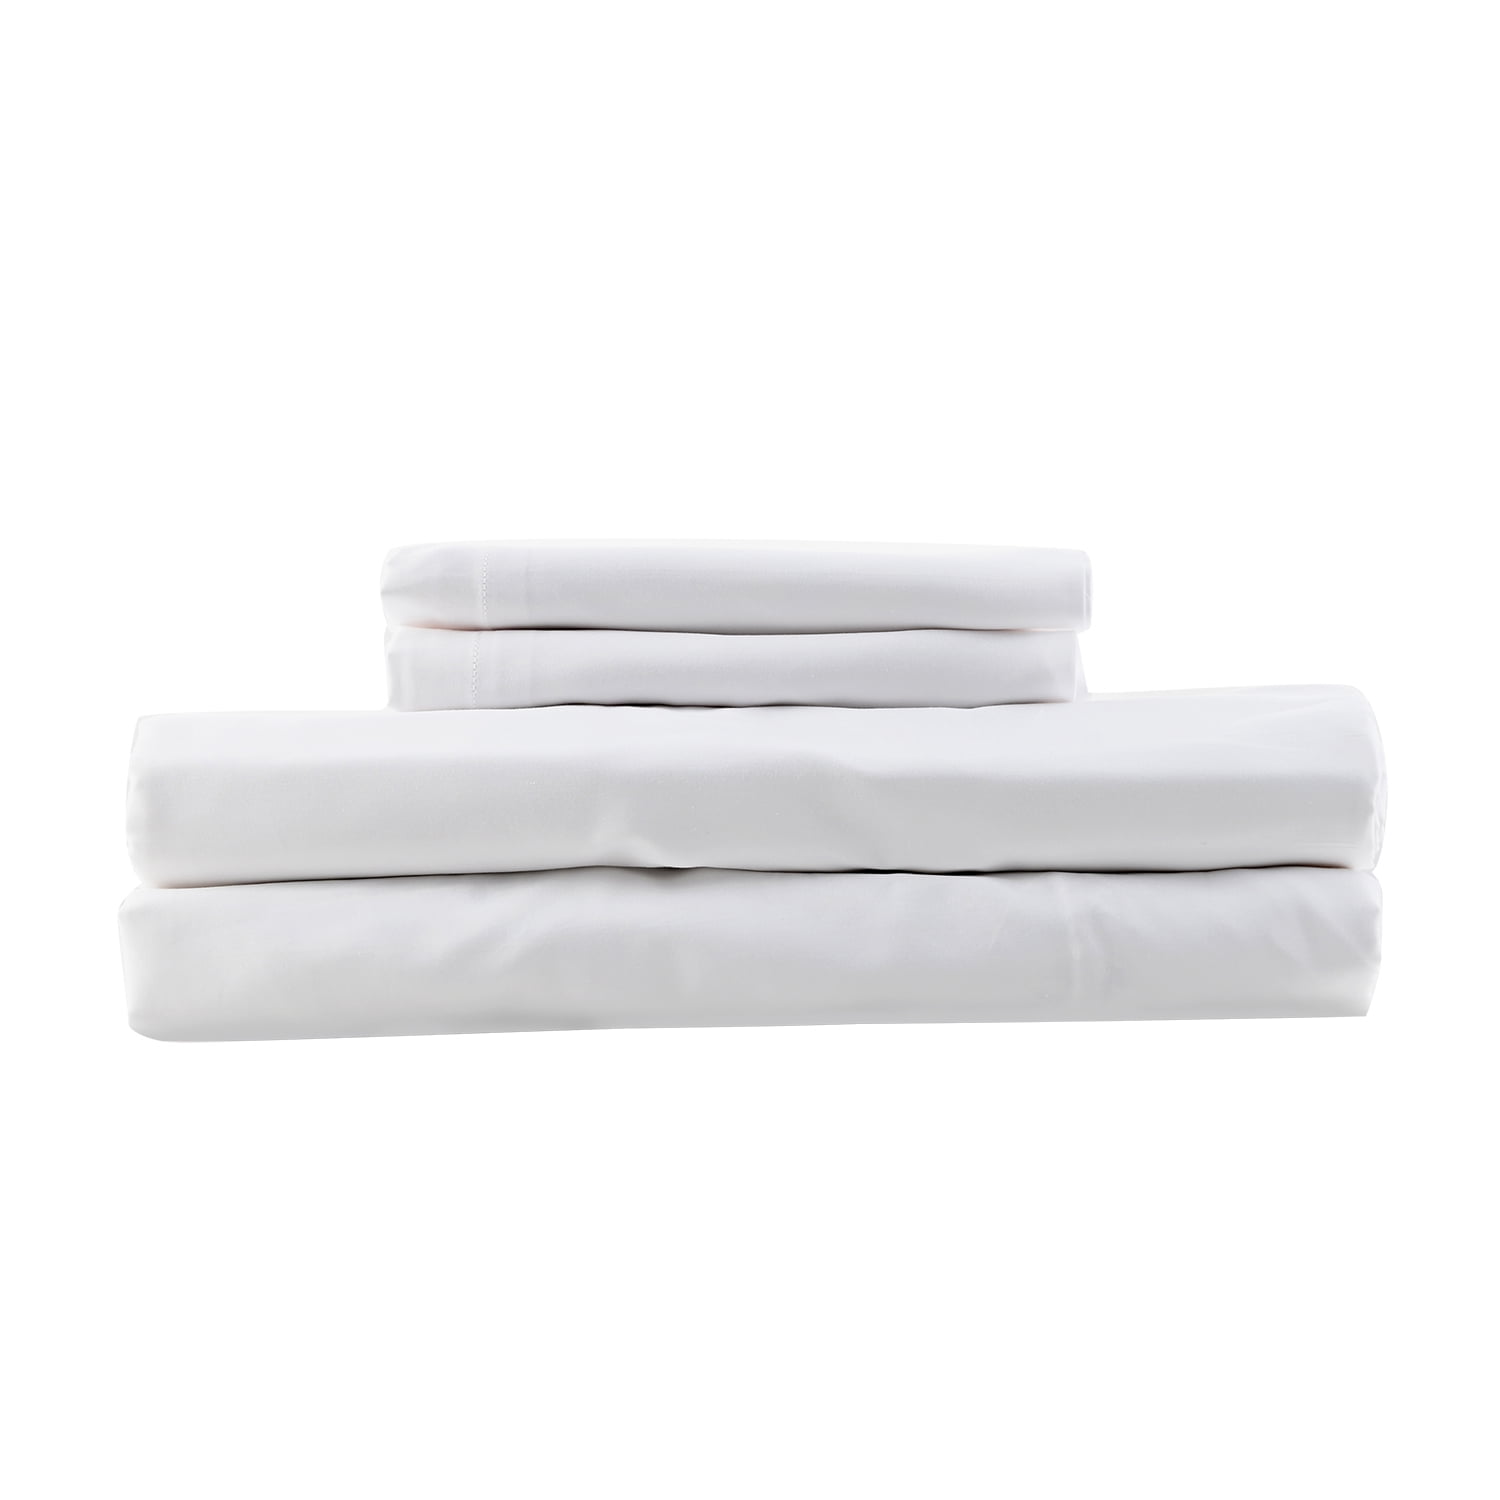 HOMESTEAD White 300 TC 100% Percale Cotton Solid Breathable Sheet Set-Full 